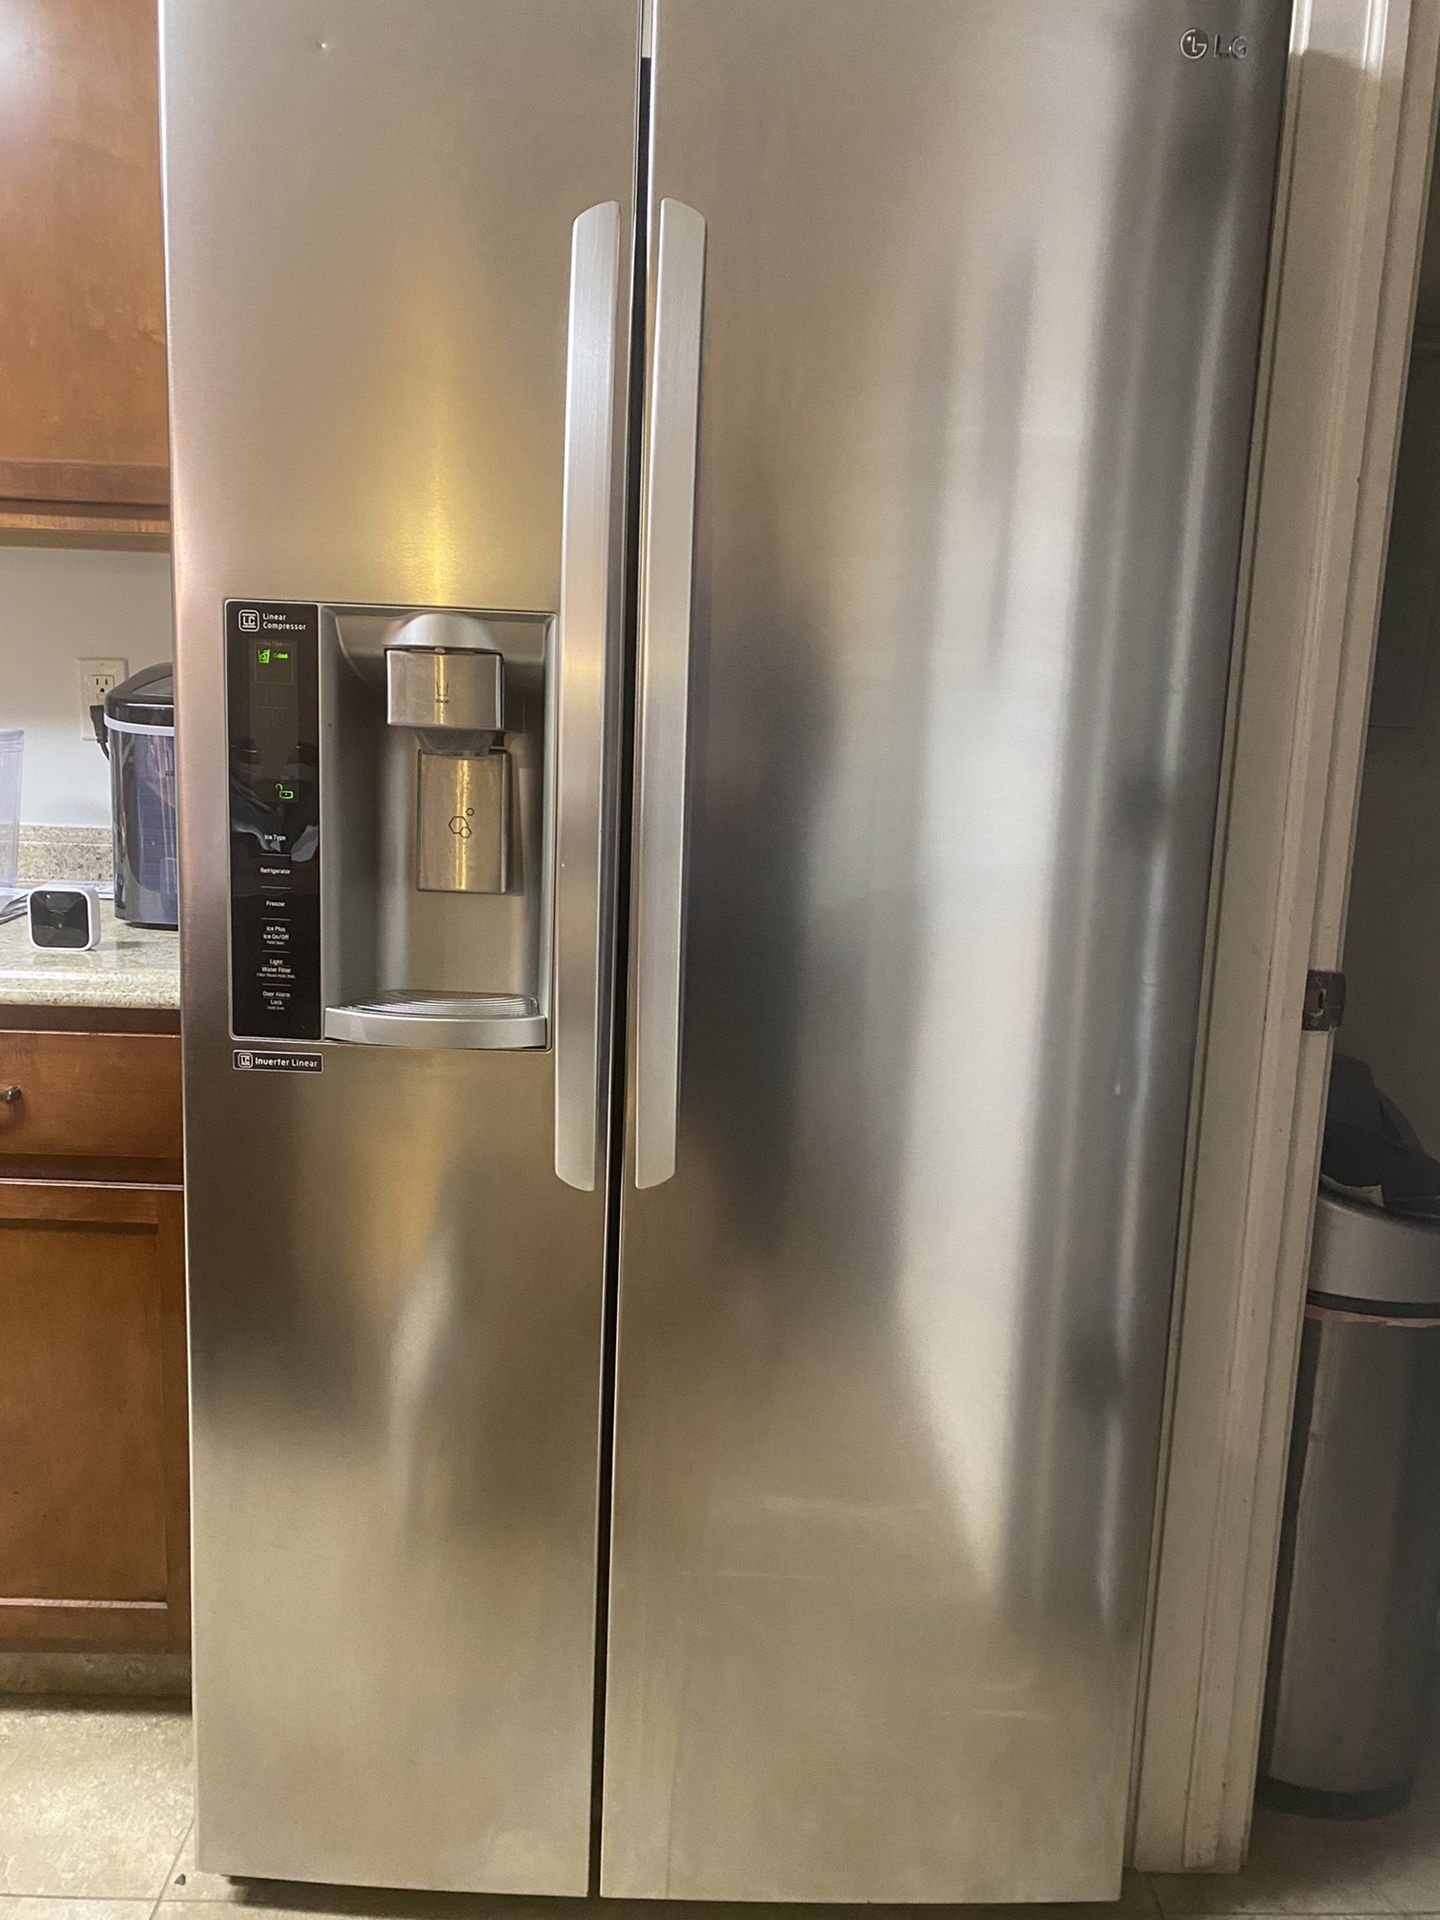 LG Refrigerator-2 Years Old, Near-perfect Condition!